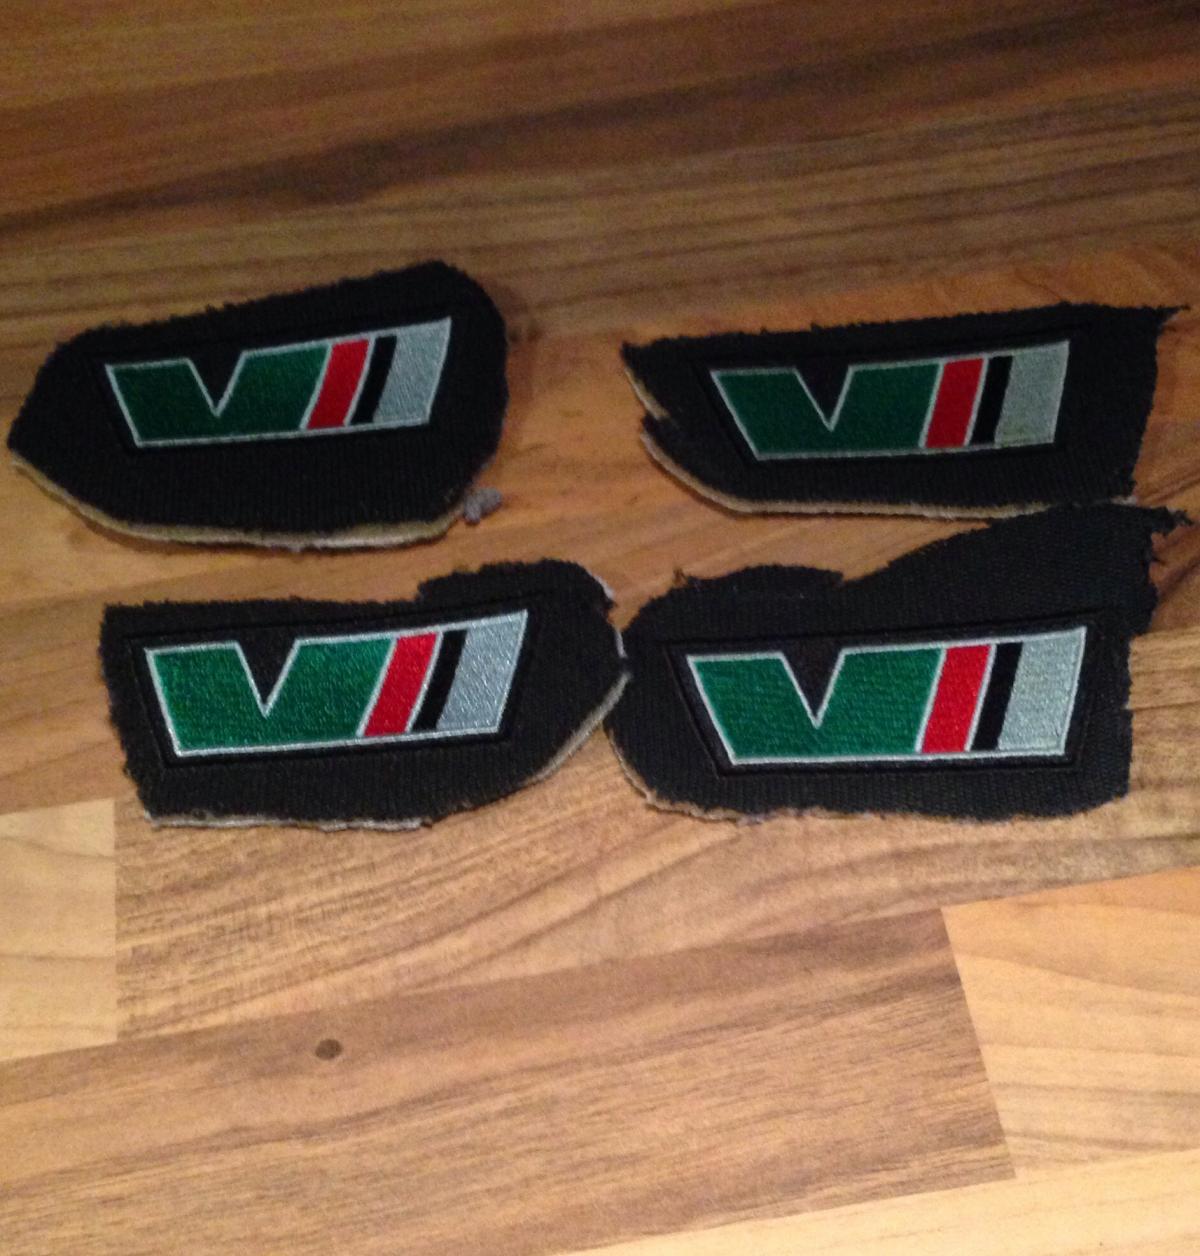 Fabia vrs seat embroided vrs logo patches - Parts For Sale - BRISKODA